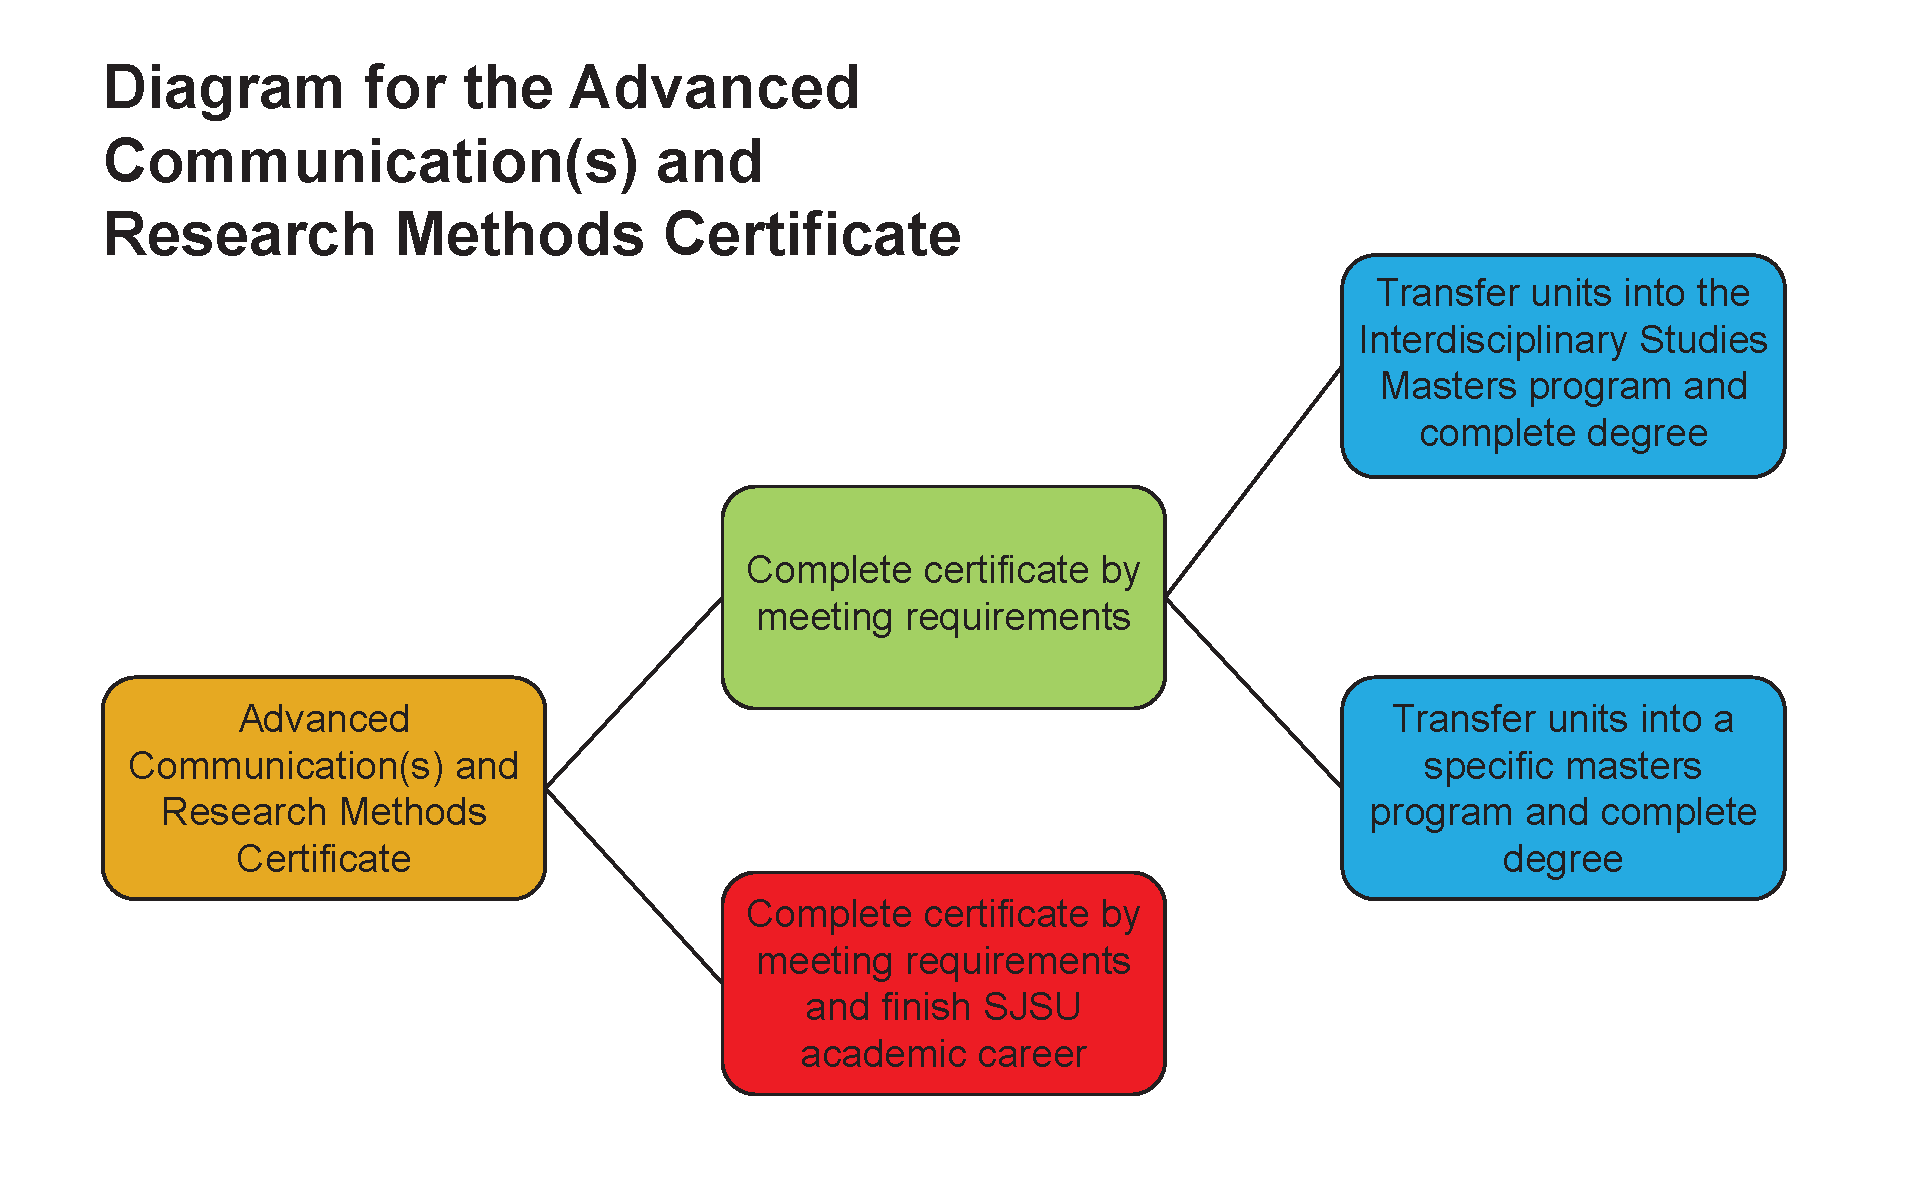 Diagram of advanced communication and research methods certification